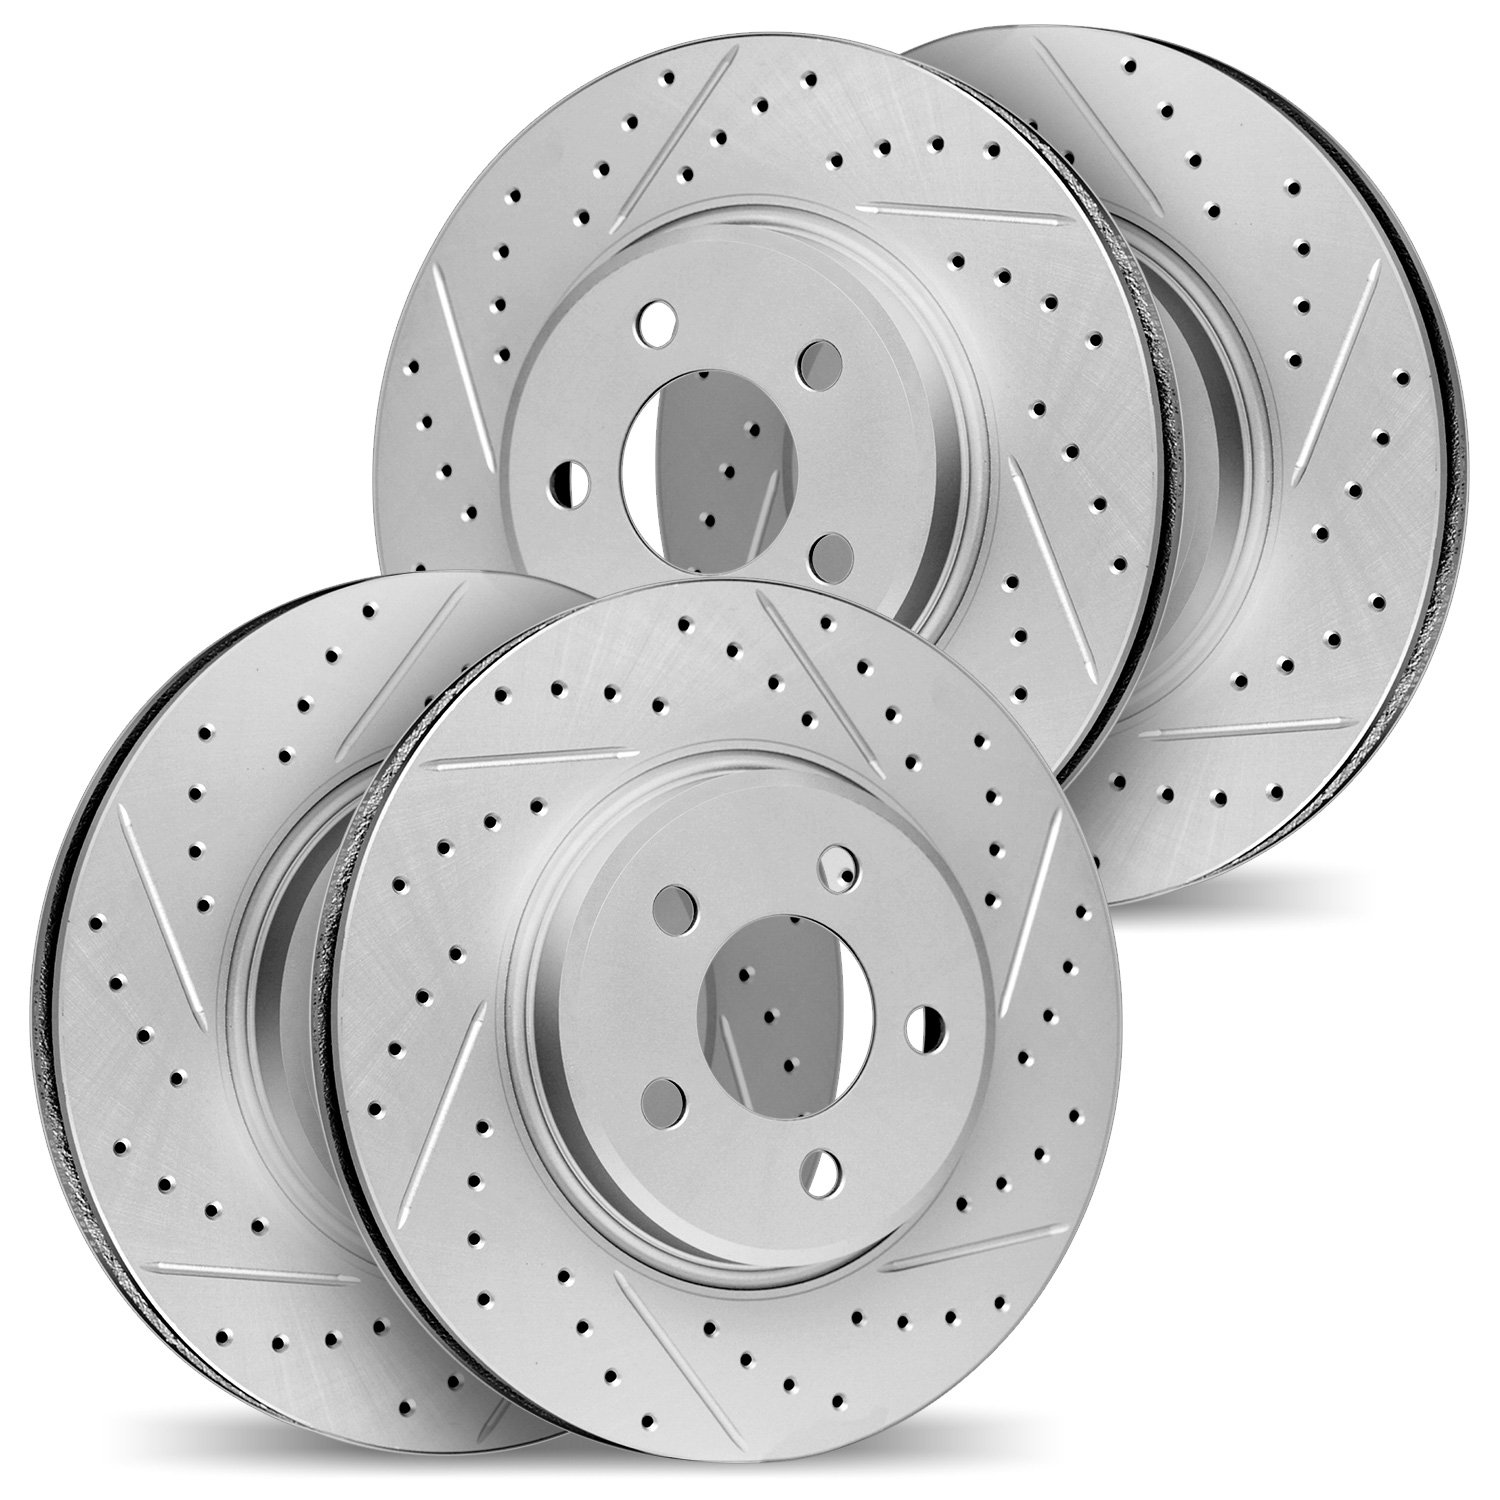 2004-63037 Geoperformance Drilled/Slotted Brake Rotors, 2006-2012 Mercedes-Benz, Position: Front and Rear